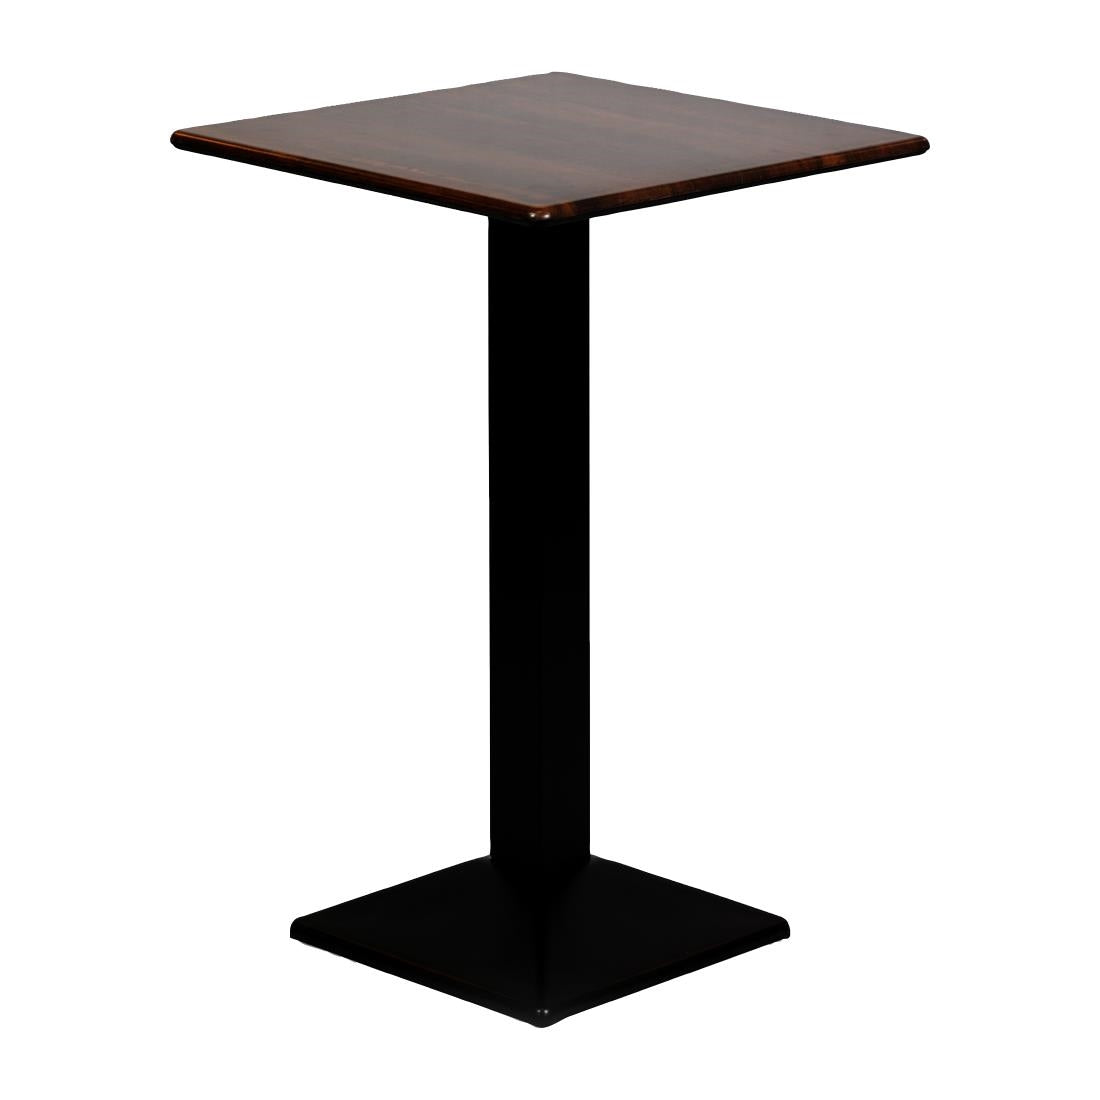 CZ829 Turin Metal Base Square Poseur Table with Laminate Top Walnut 600mm JD Catering Equipment Solutions Ltd